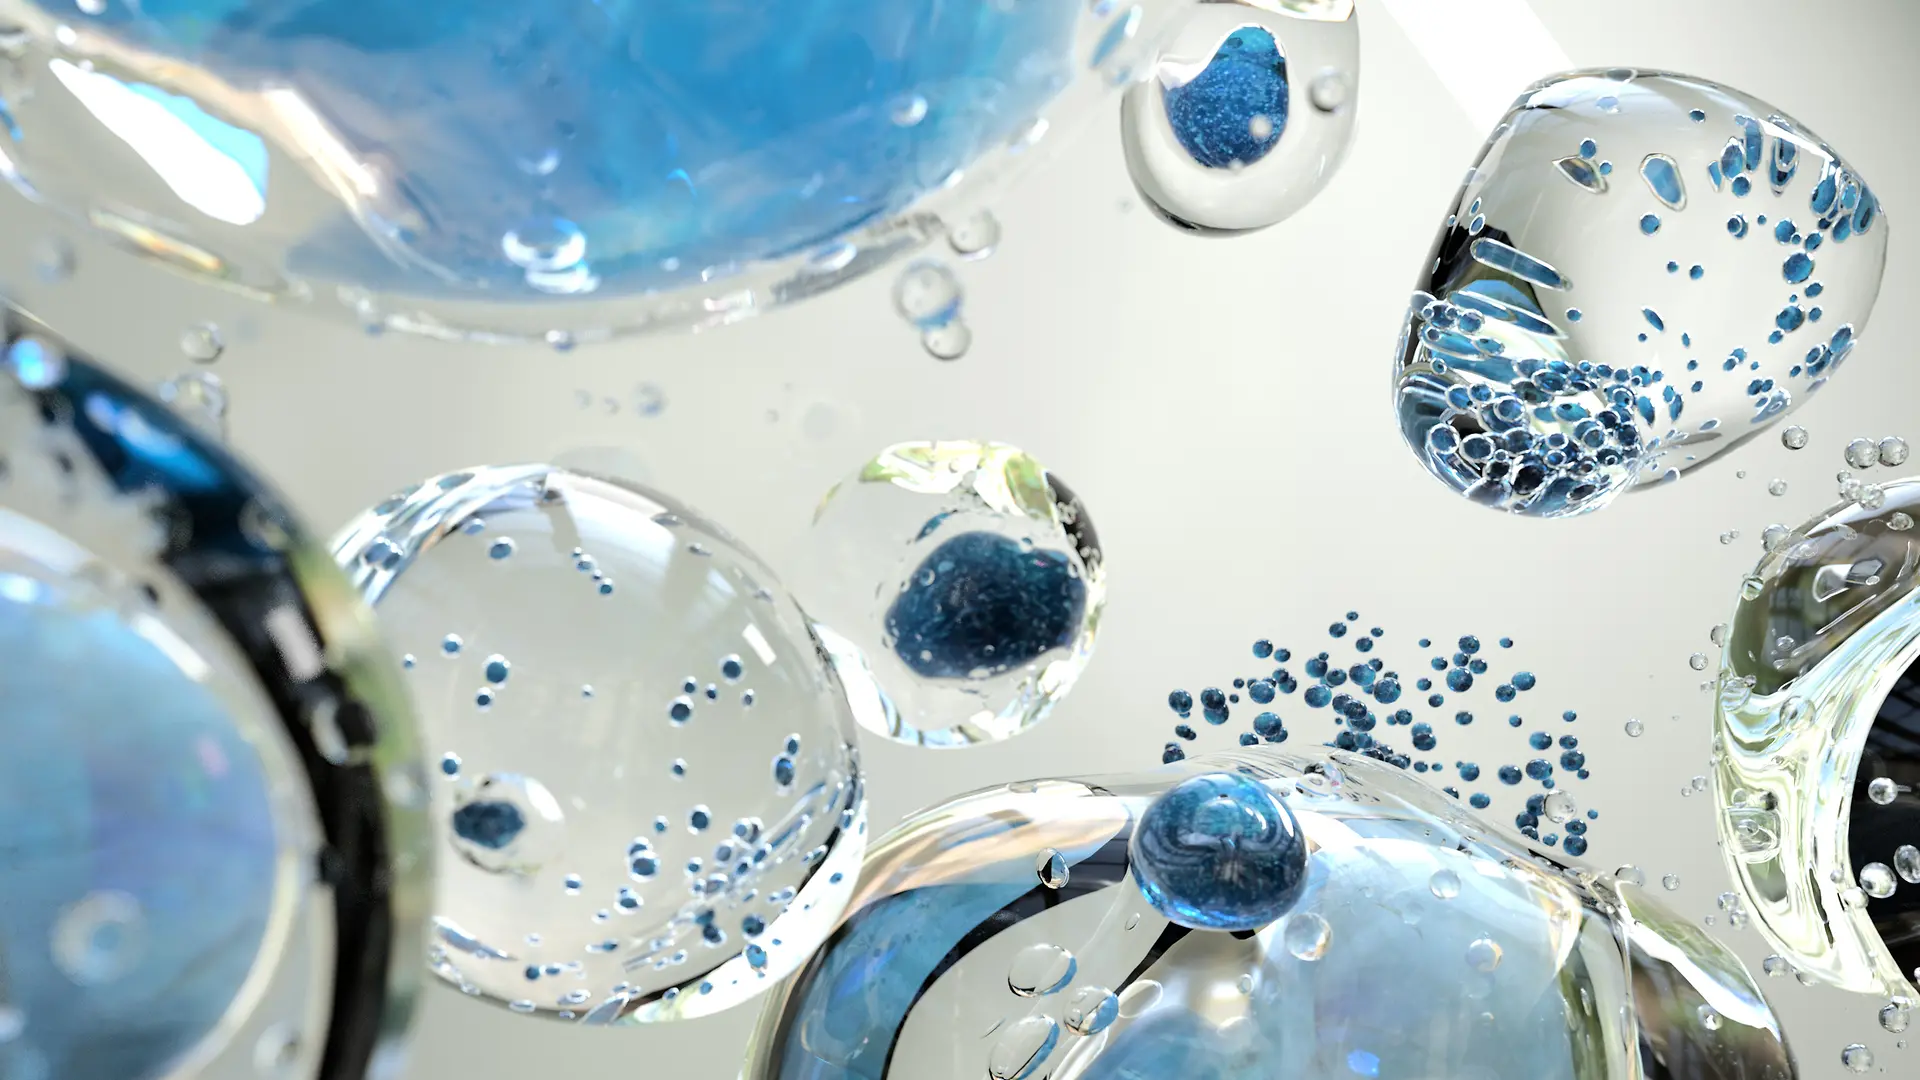 Abstract illustration of water drops. 